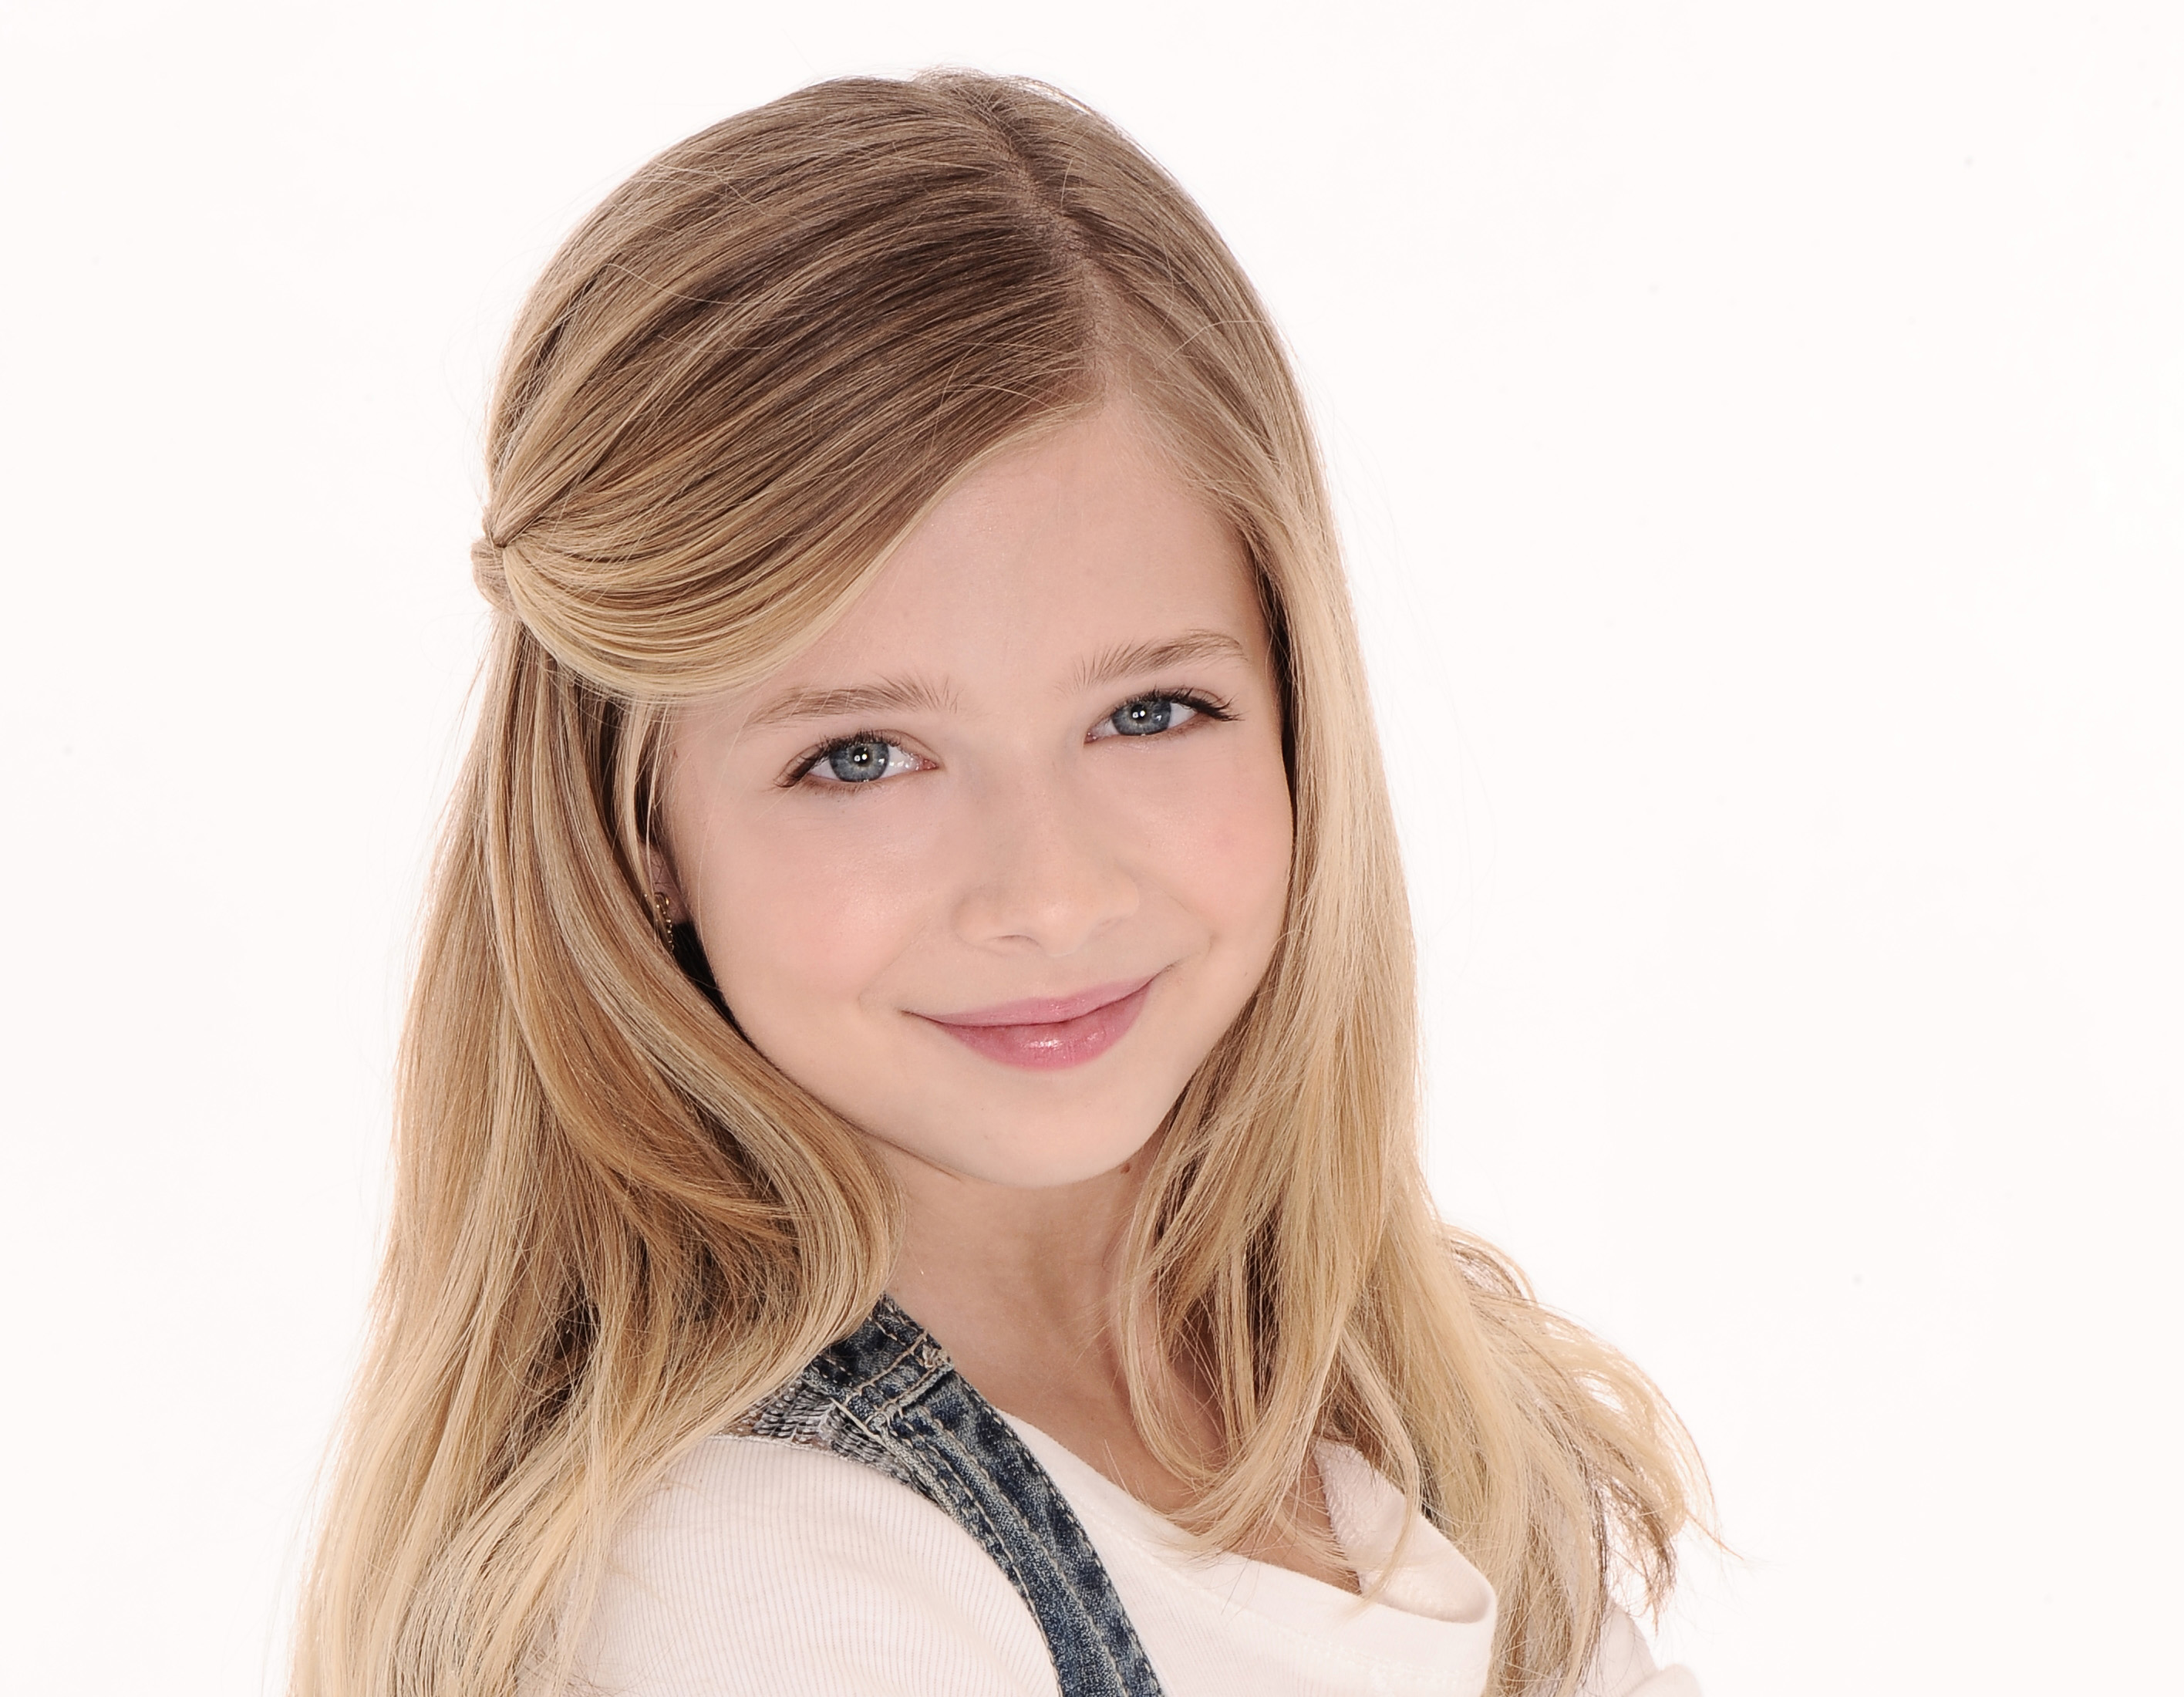 Jackie Evancho performs tonight at the Paramount.